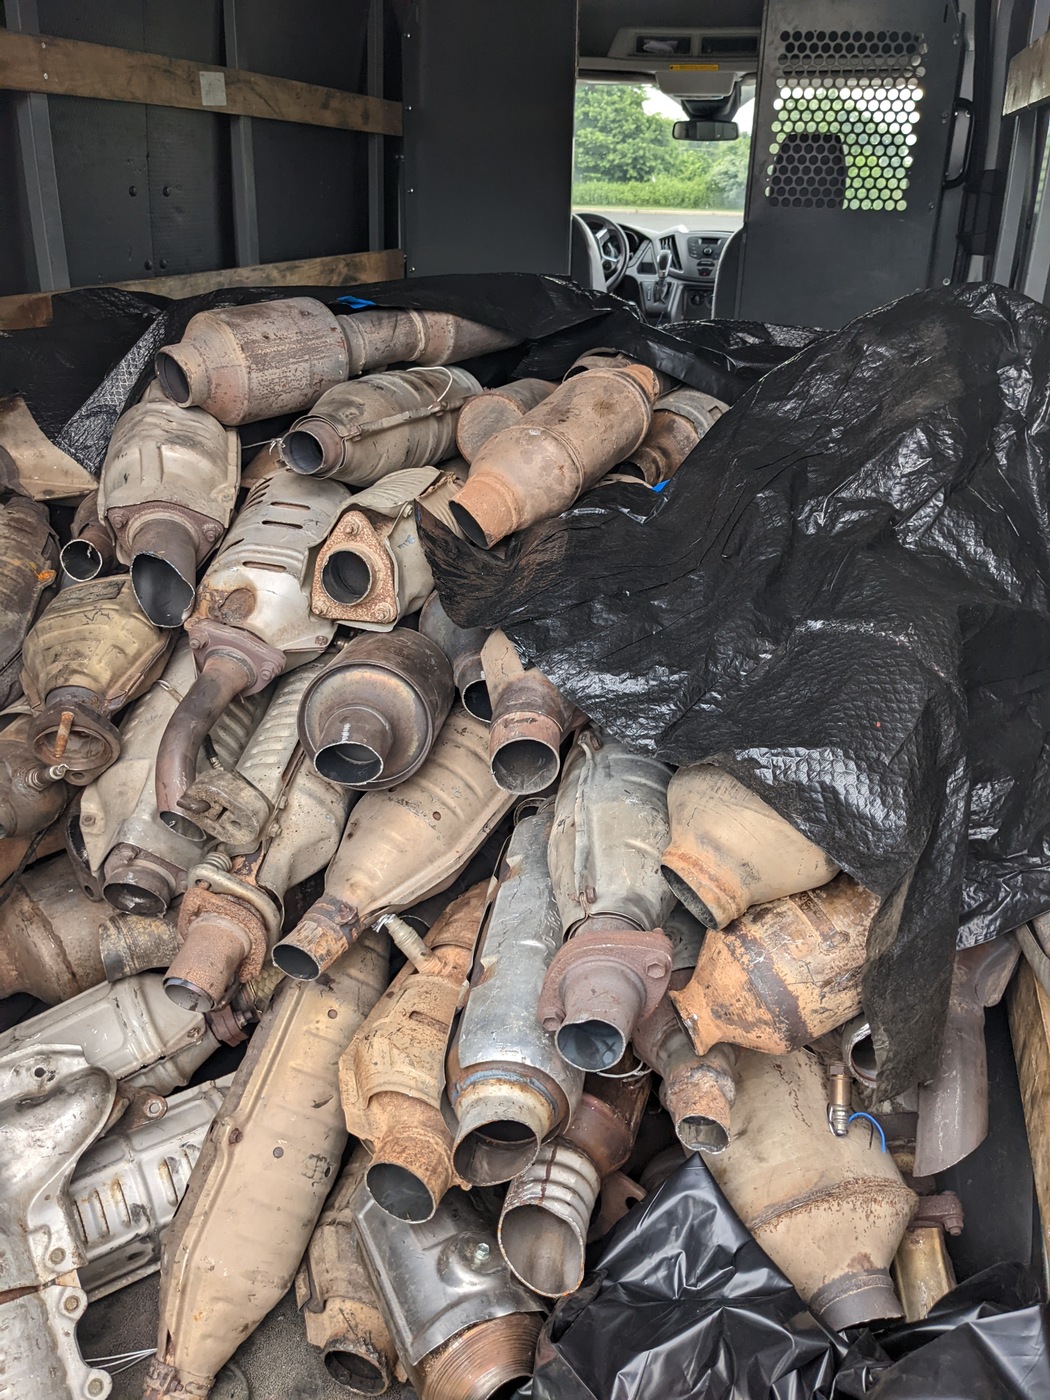 As part of a nationwide takedown, FBI agents collected thousands of catalytic converters from junk yards and cut them to make them appear stolen (pictured). They then offered them up for sale. At the time of the takedown, seizures, and arrests, one suspect had amassed multiple pallets of catalytic converters, which were first shipped to a refinery and eventually overseas for recycling purposes.